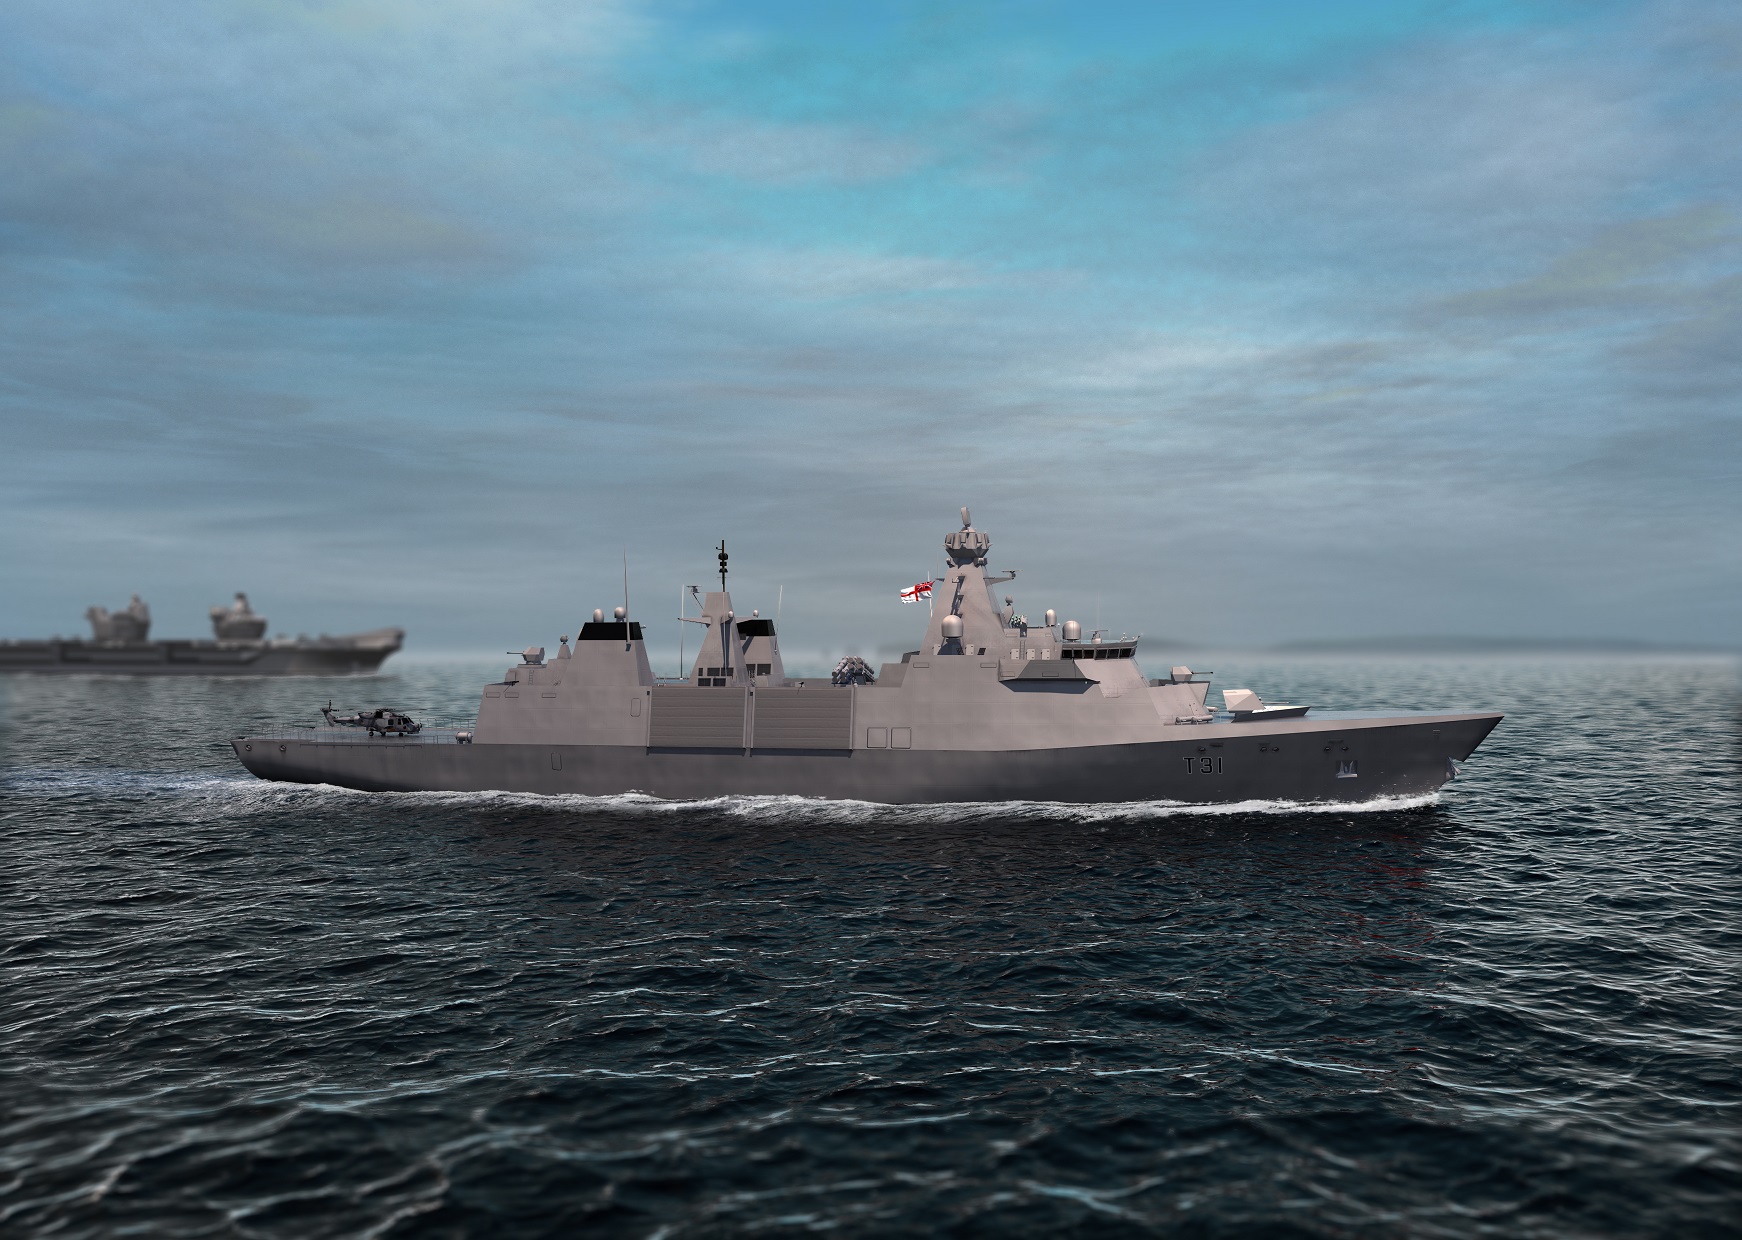 DE&S has signed a multi-million contract with Thales to provide an on-shore test and integration facility for the Type 31.